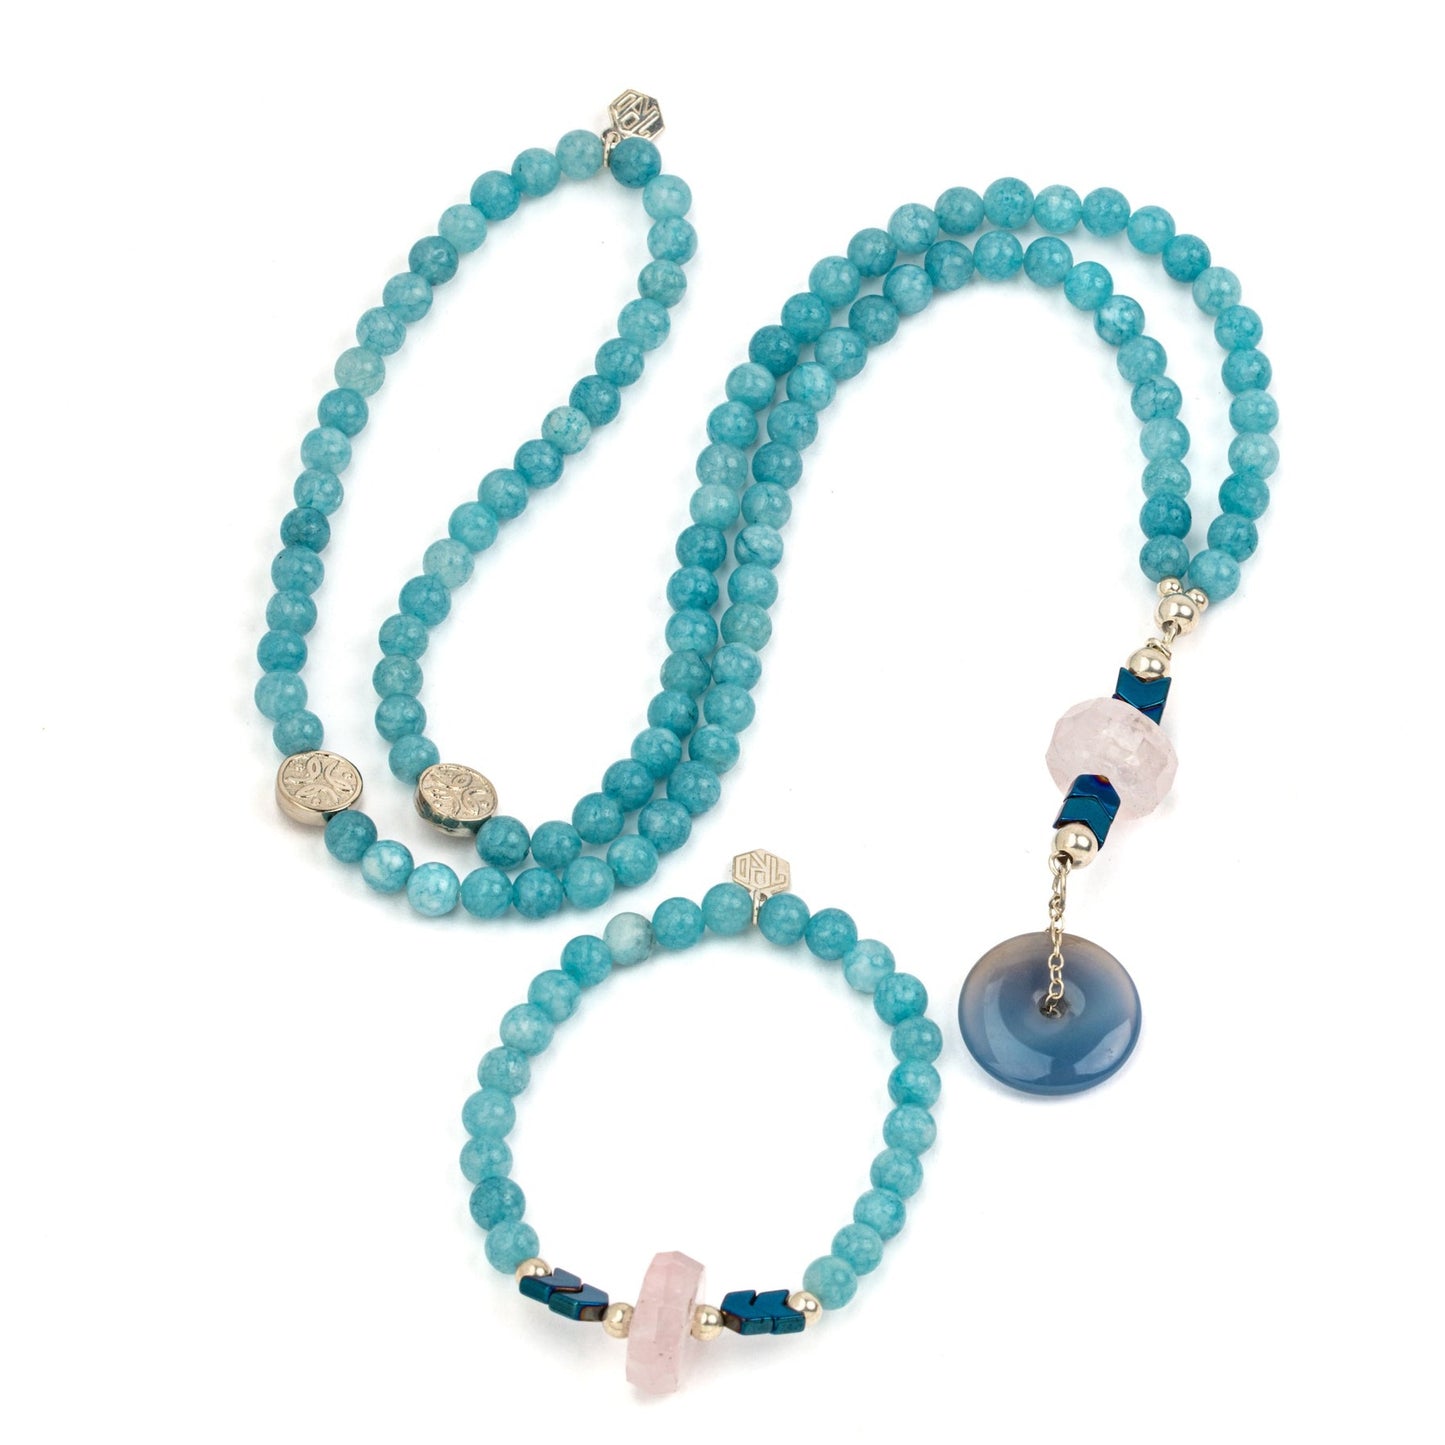 blue agate necklace and bracelet set with silver